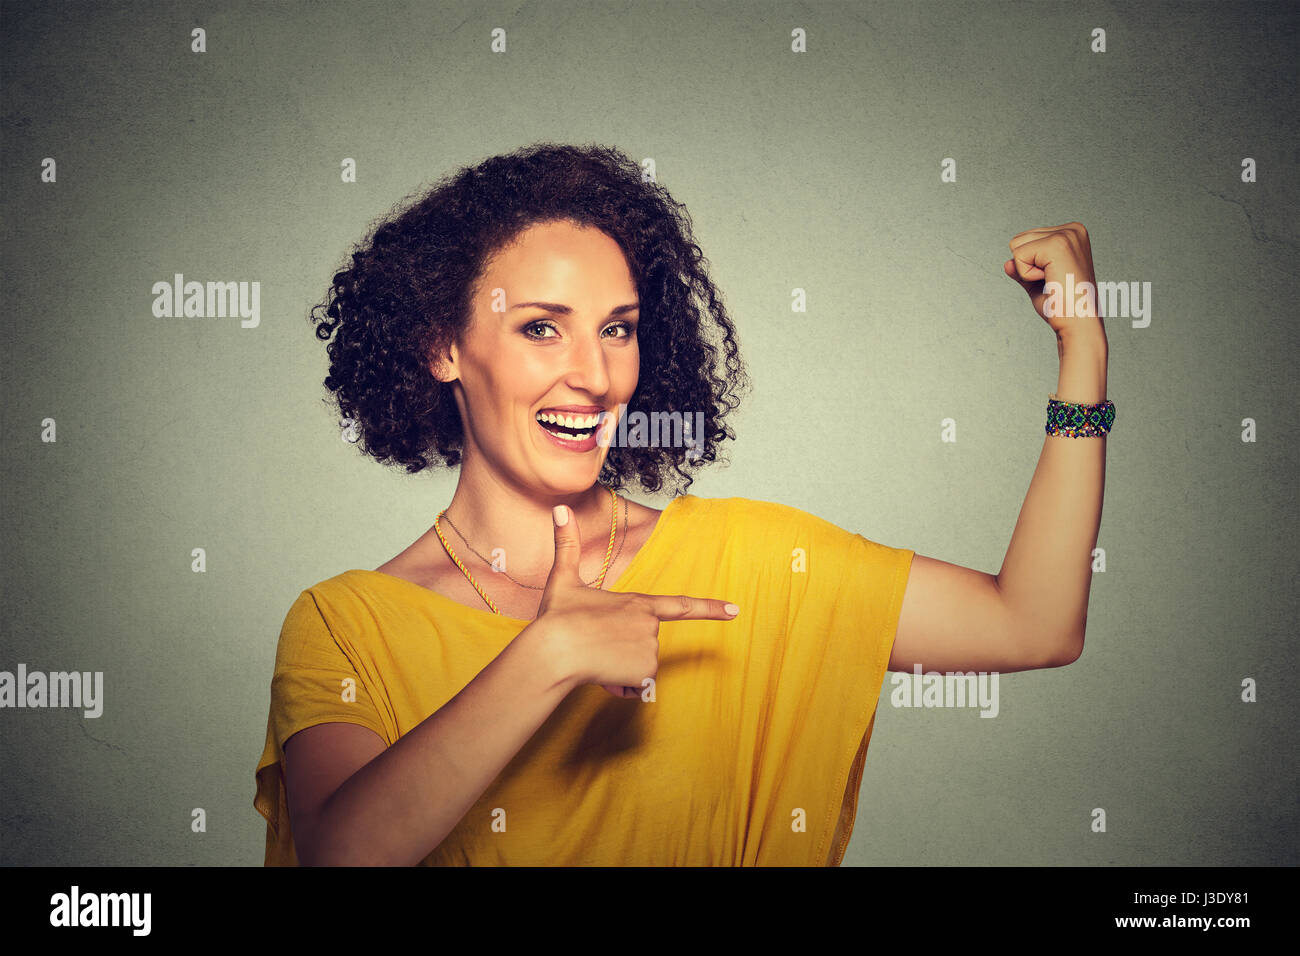 Closeup portrait fit middle aged healthy model woman flexing muscles confident showing her strength isolated on gray background. Positive emotion faci Stock Photo